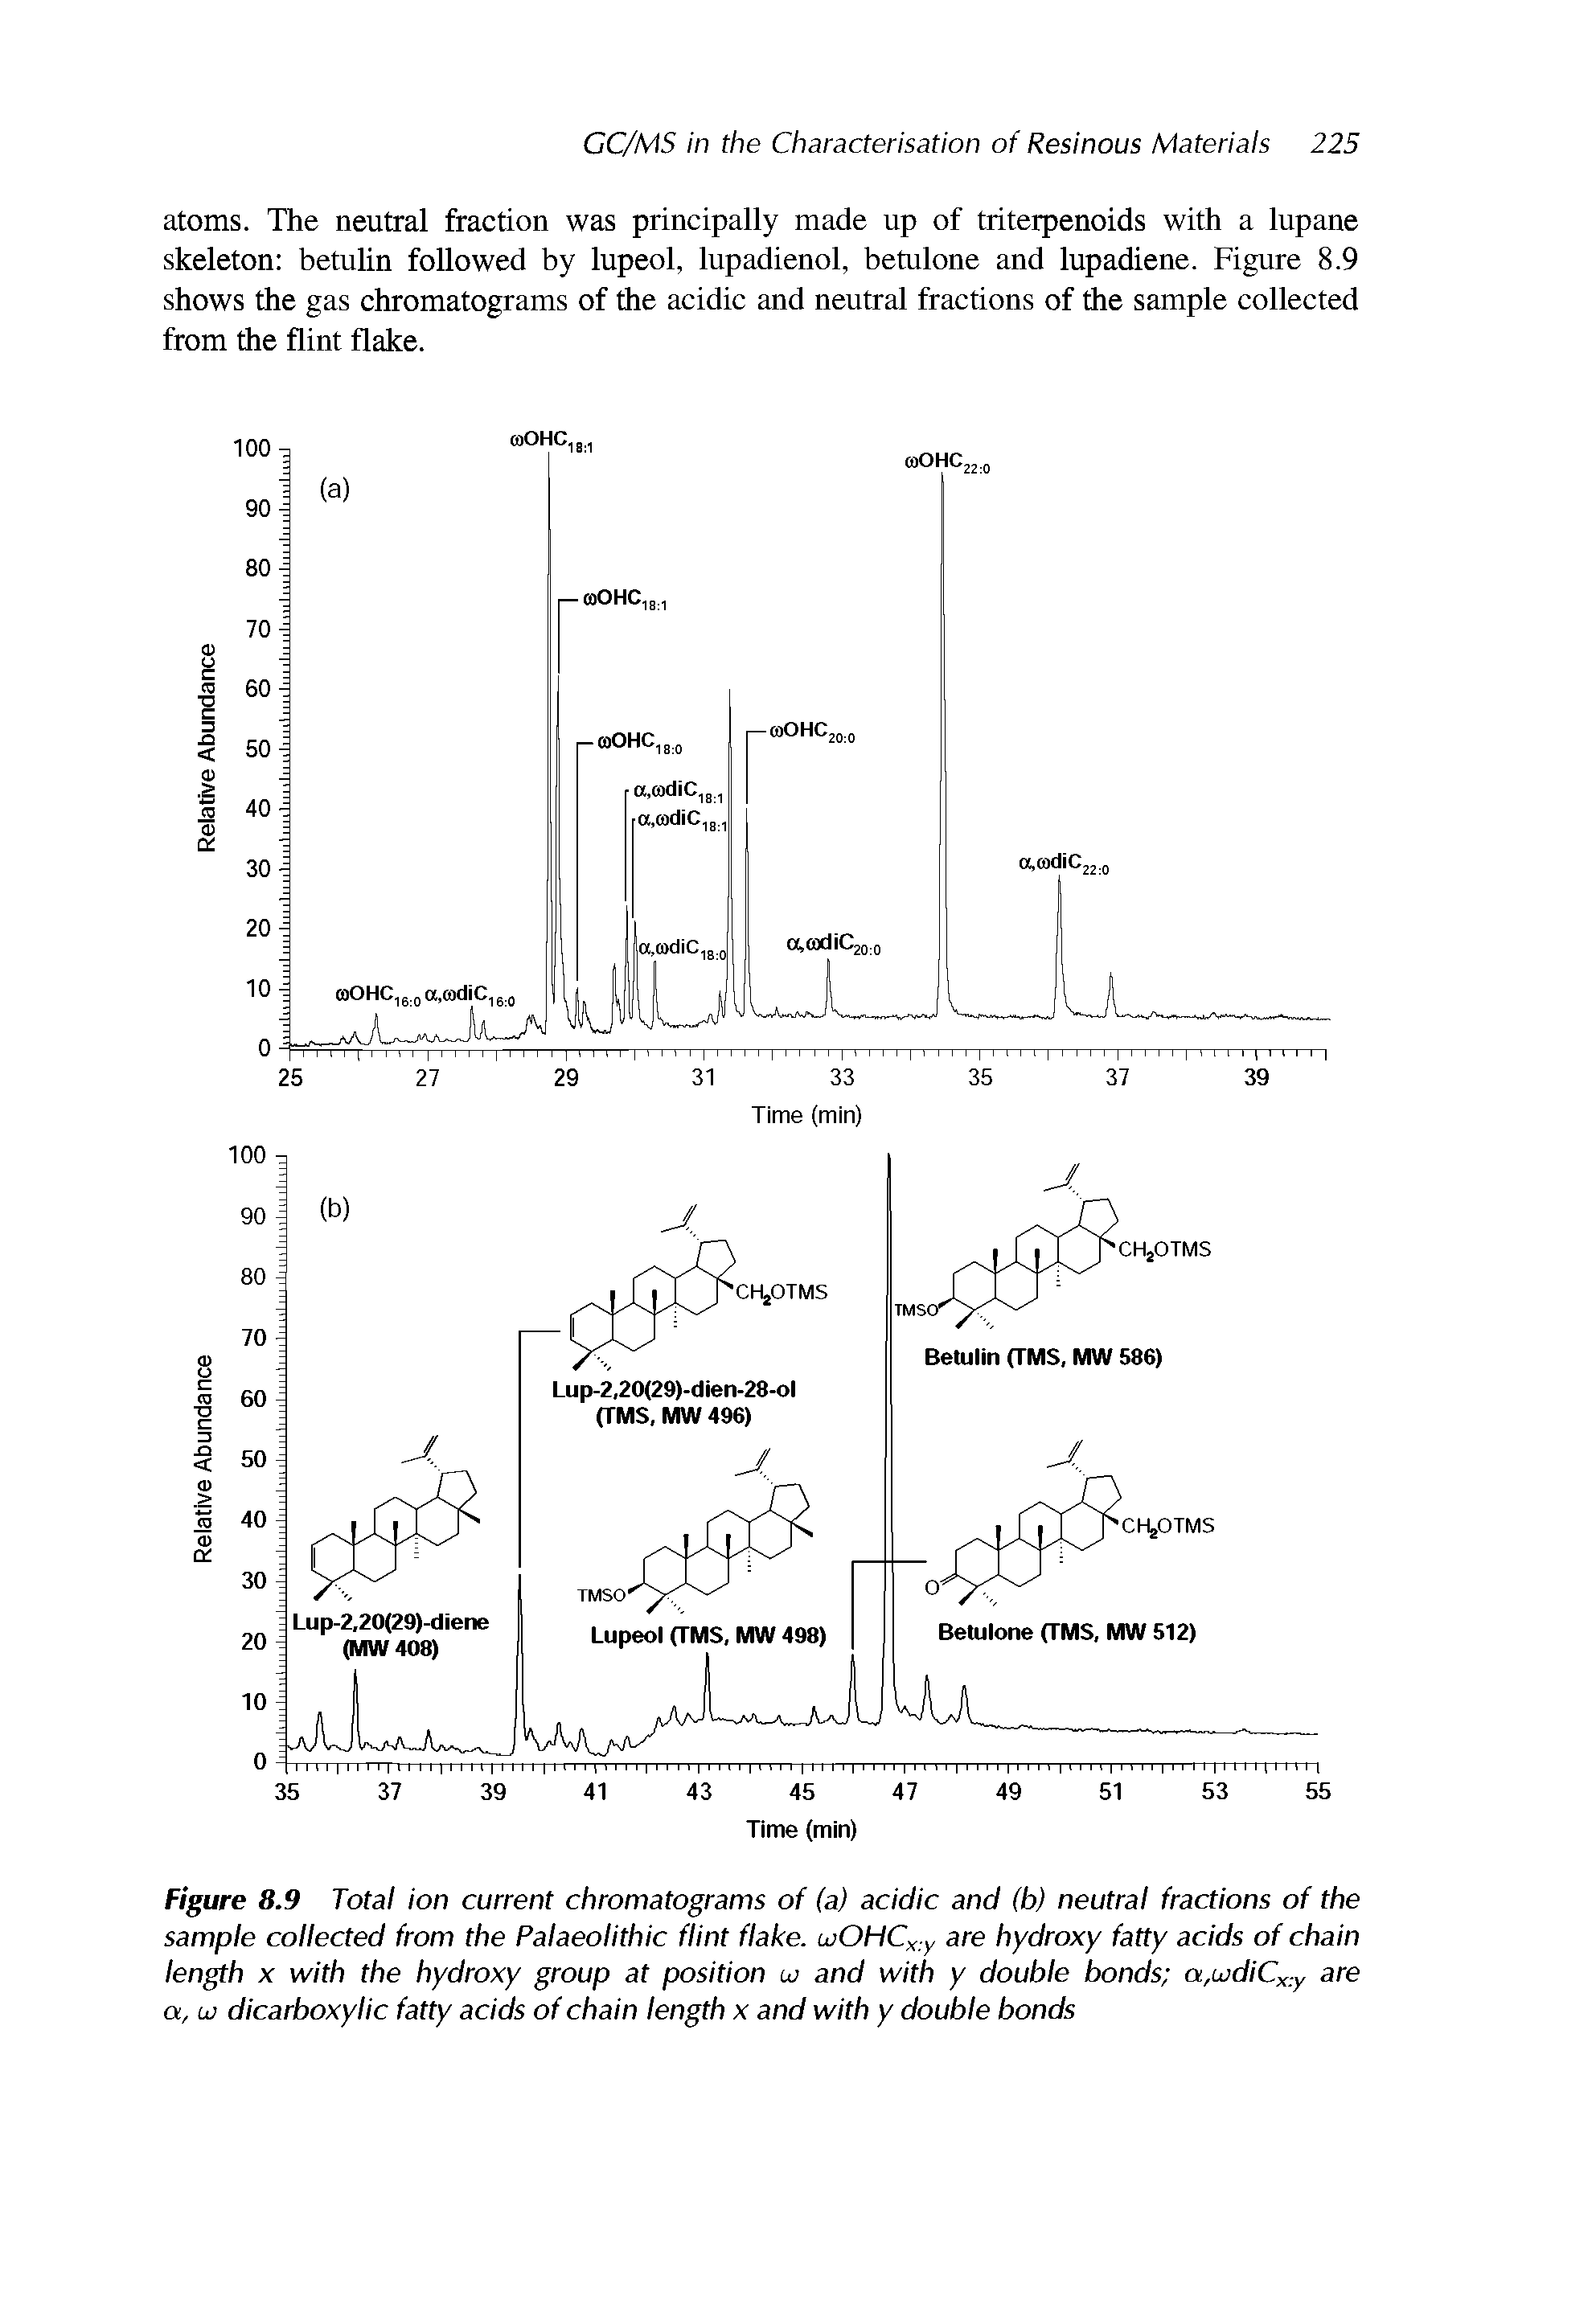 Figure 8.9 Total ion current chromatograms of (a) acidic and (b) neutral fractions of the sample collected from the Palaeolithic flint flake, taOHCx y are hydroxy fatty acids of chain length x with the hydroxy group at position cu and with y double bonds a,uidiCx y are a, uj dicarboxylic fatty acids of chain length x and with y double bonds...